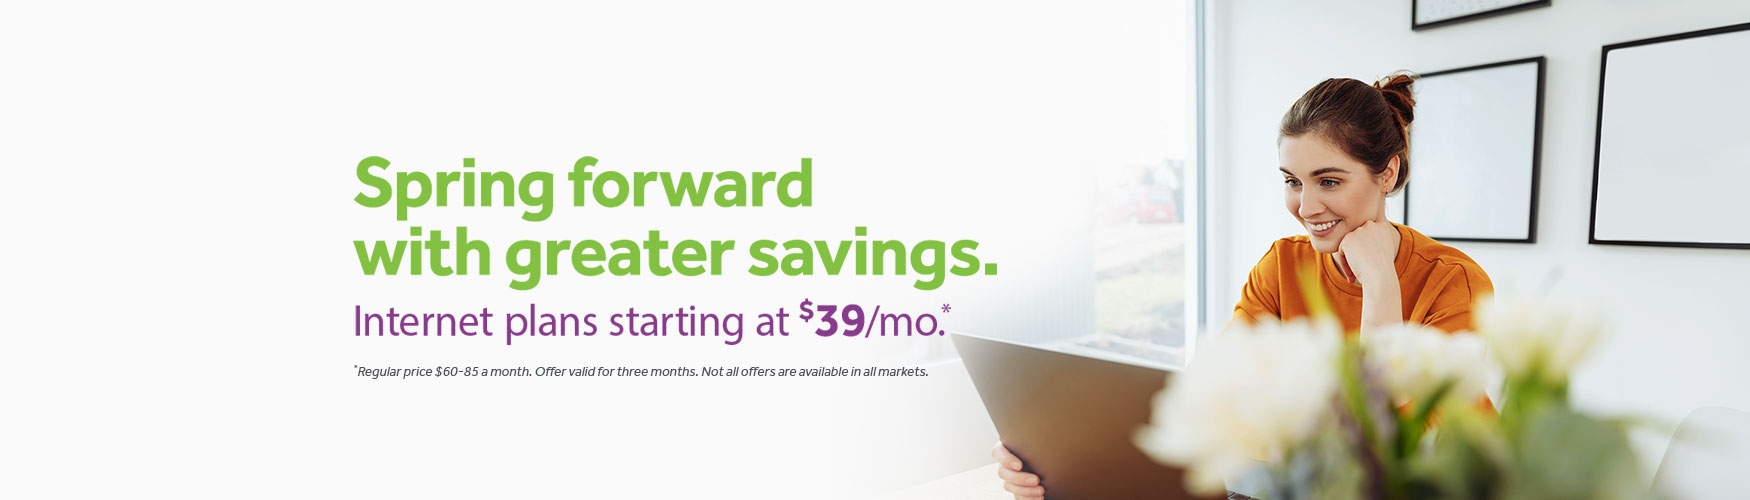 Spring forward with greater savings. Internet plans starting at $39/mo* *Regular price $60-85 a month. Offer valid for three months. Not all offers are available in all markets. In the background there is a smiling woman on her laptop, sunlight is coming in to her room and she has flowers next to her. 